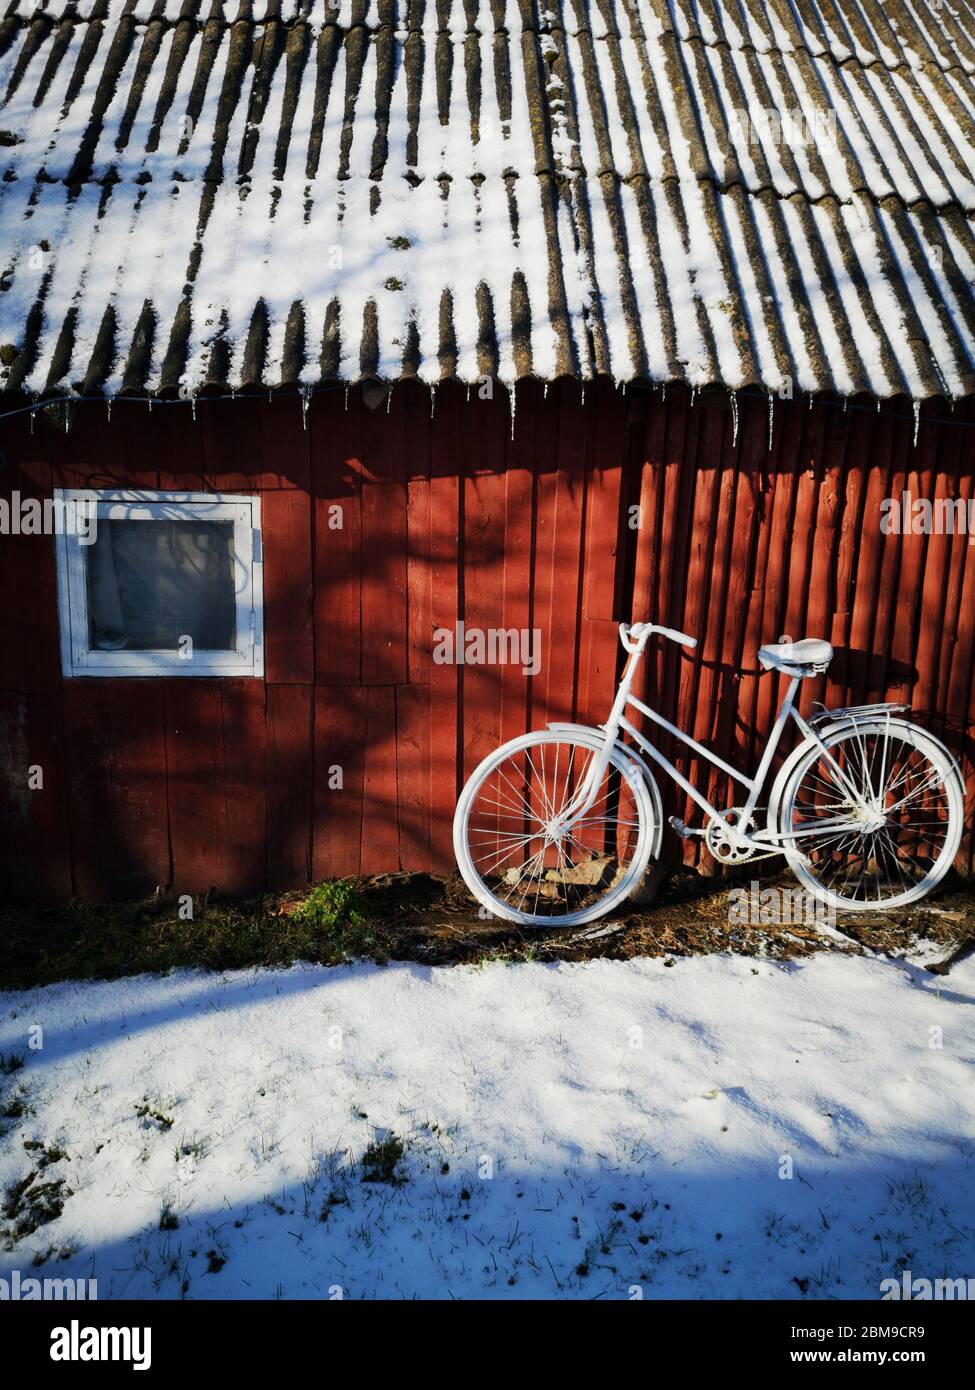 Decorative old painted in white bicycle near farm barn wall on snow Stock Photo